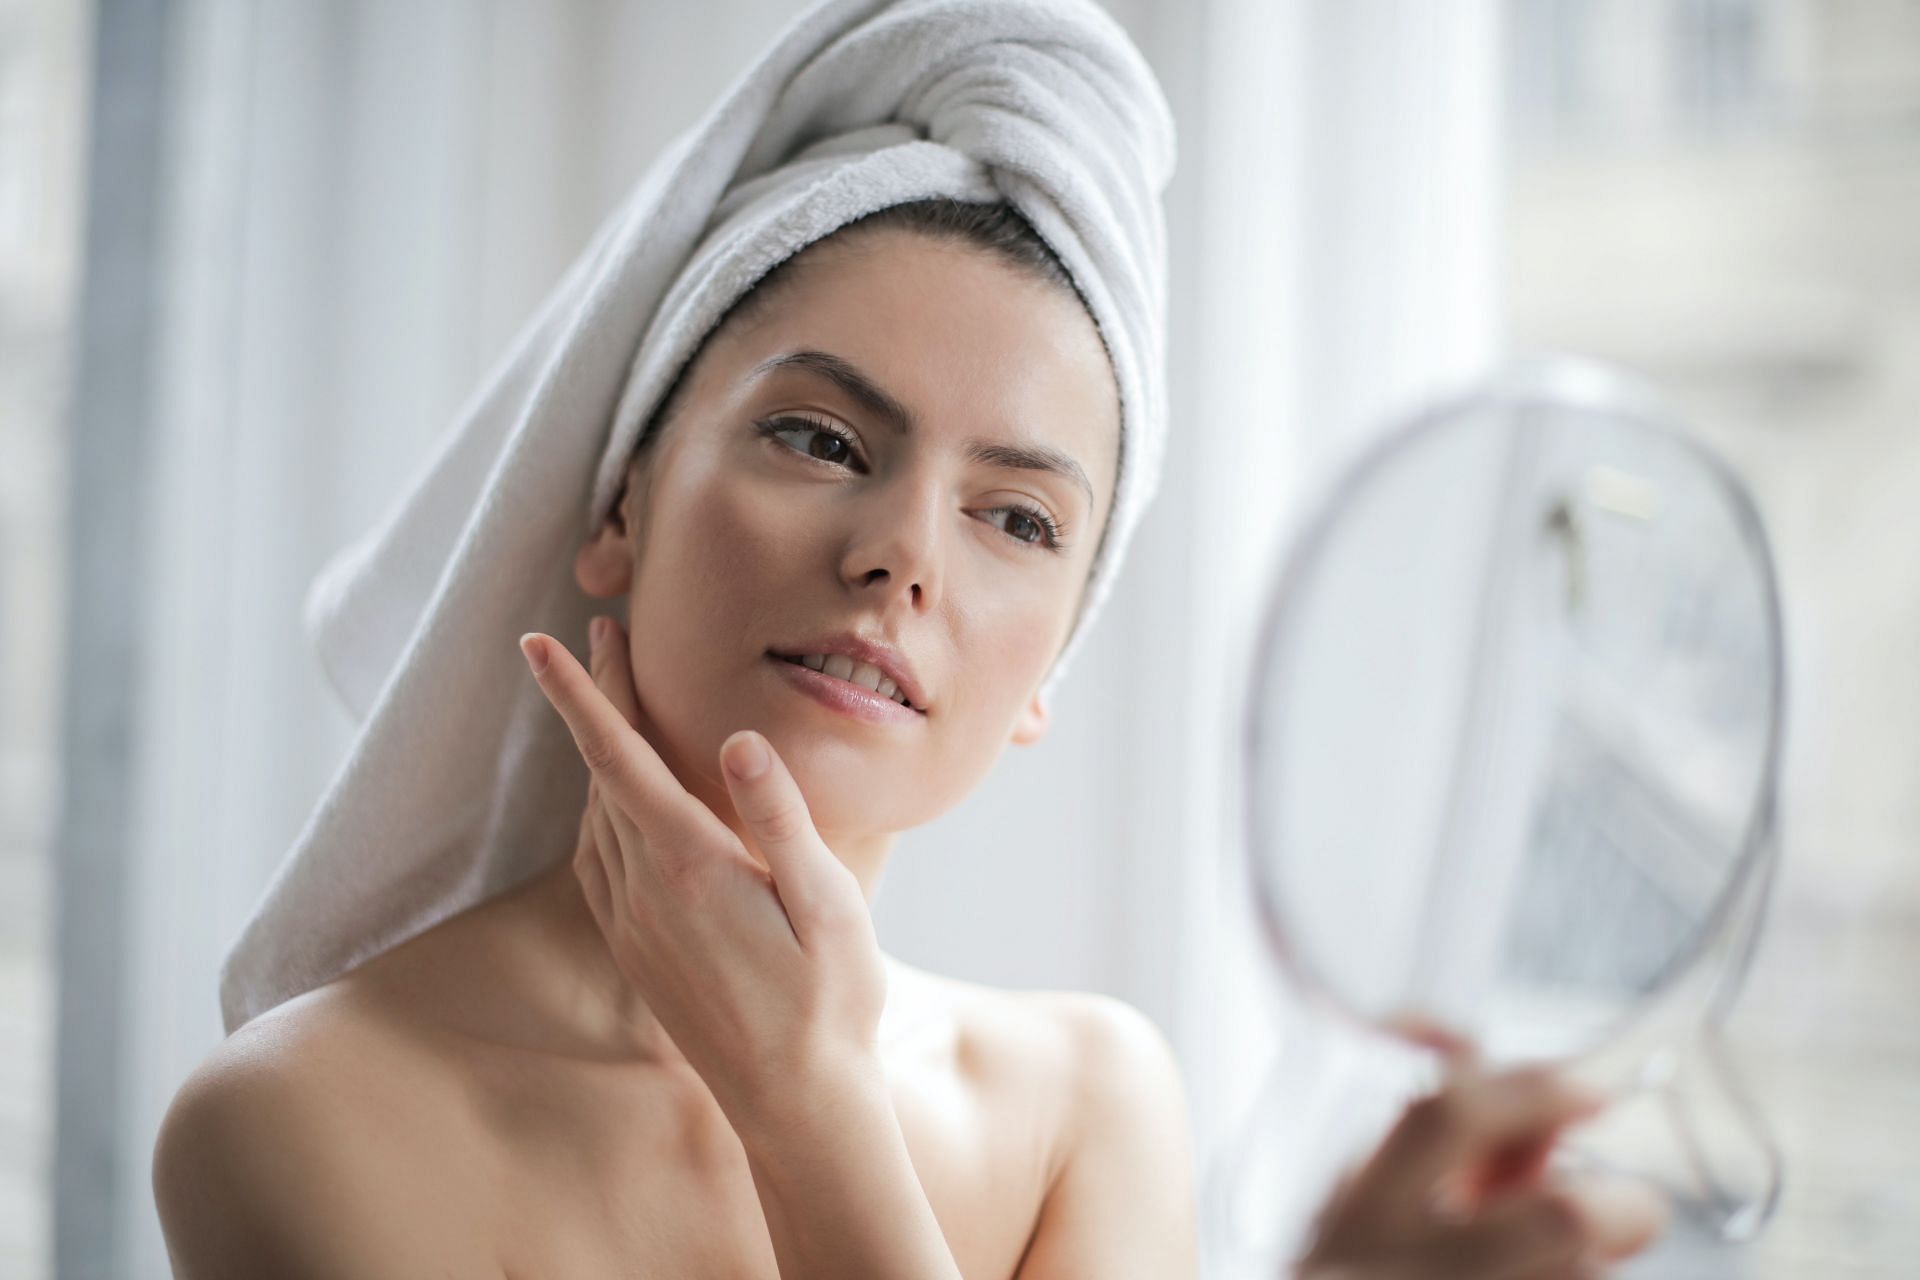 A healthy skin care routine helps in reducing fine lines and wrinkle. (Image via Pexels / Andrea Piacquadio)